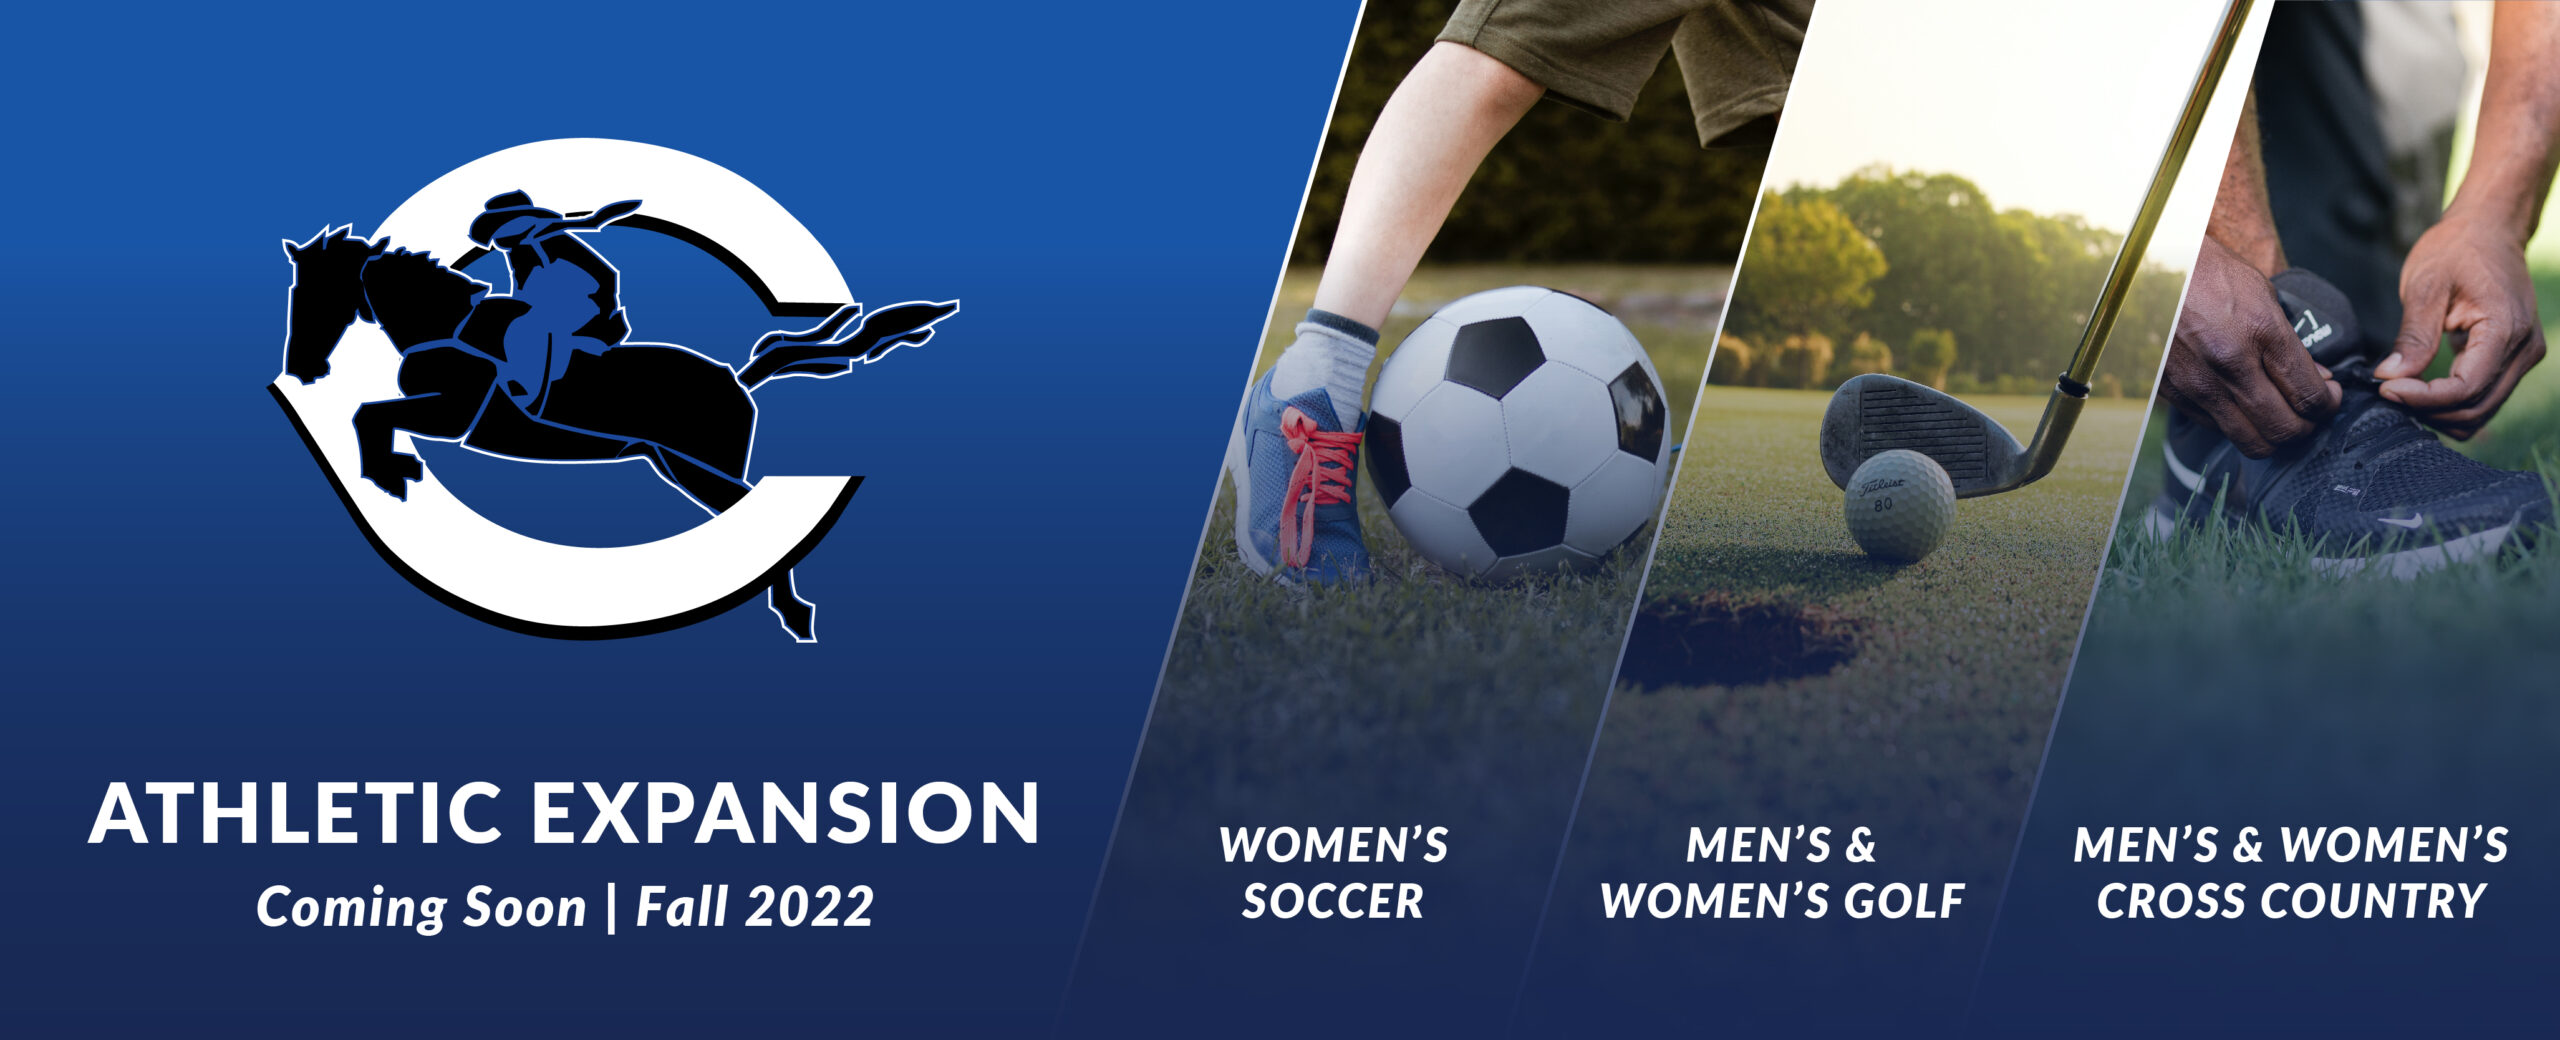 Athletic Expansion. Coming Soon, Fall 2022. Women's Soccer. Men's & Women's Golf. Men's & Women's Cross Country